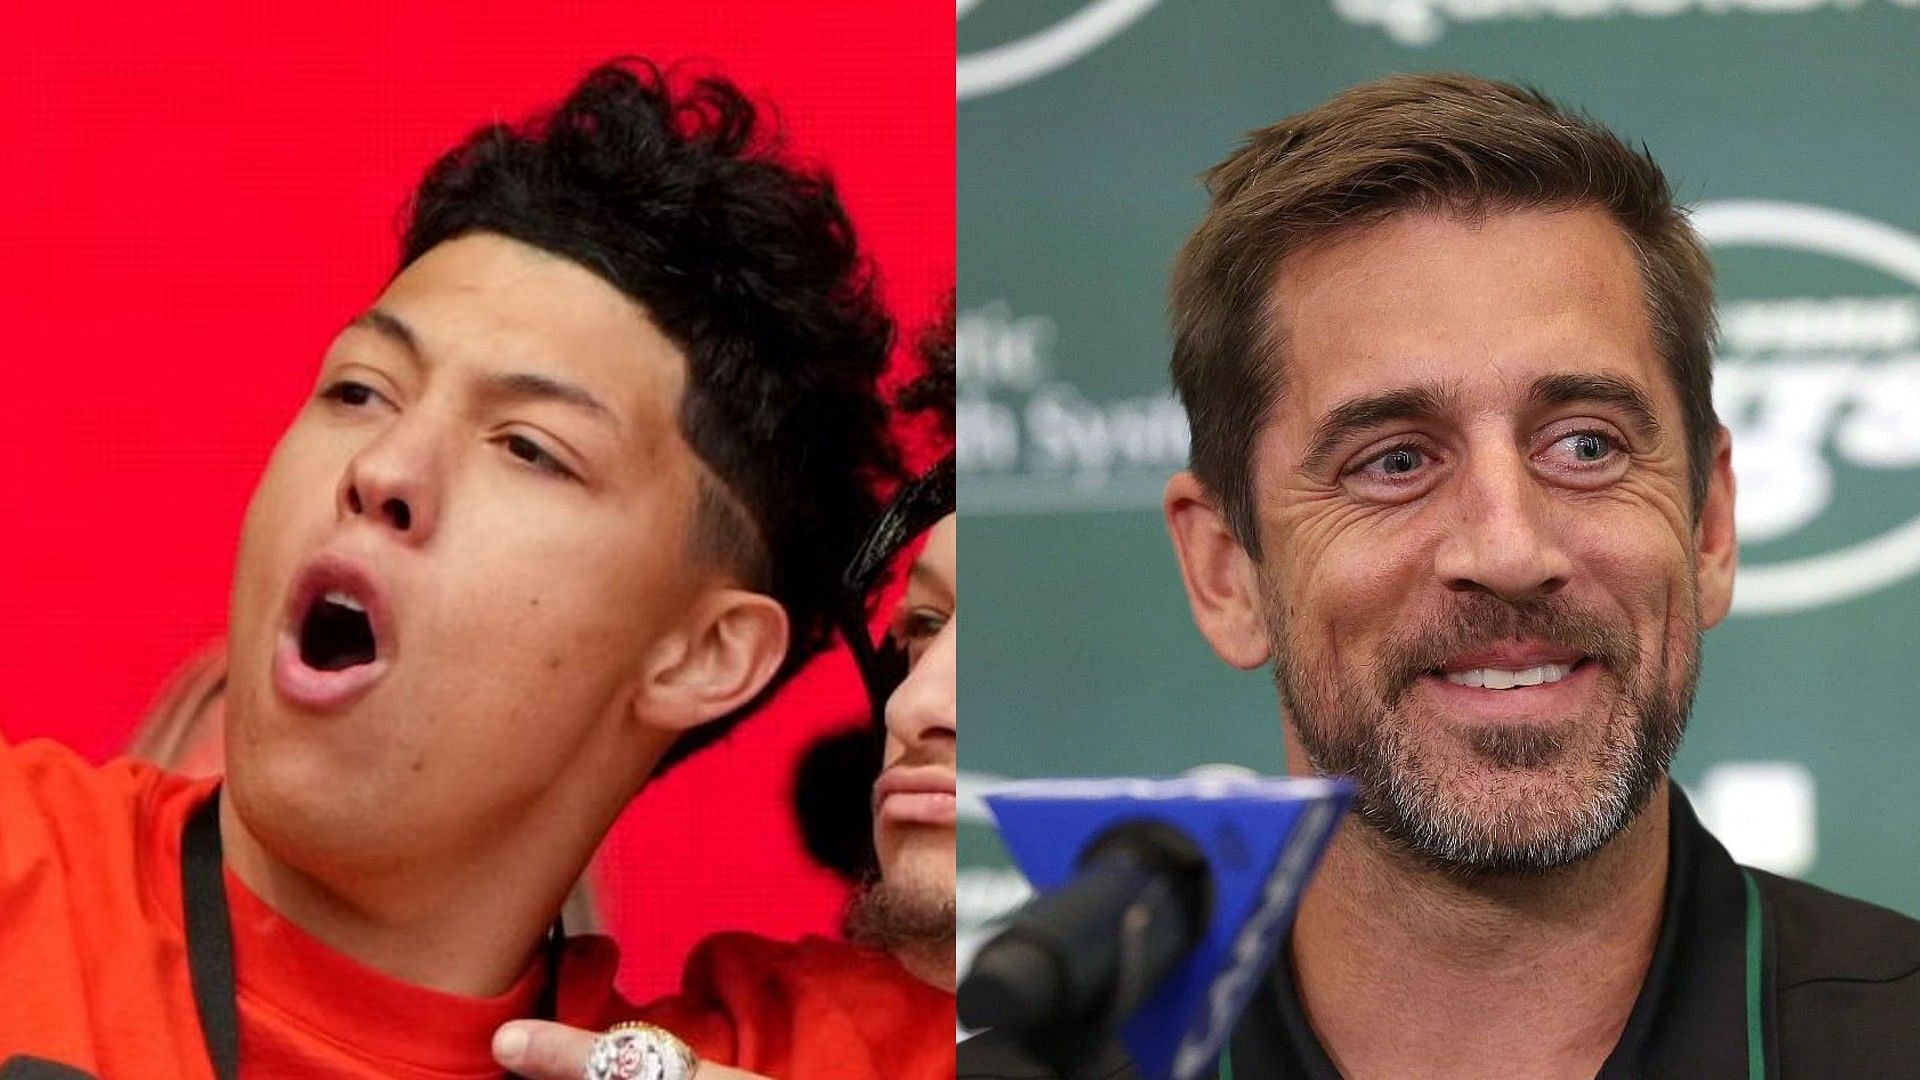 Aaron Rodgers hit Jackson Mahomes with a sly dig ahead of 2022